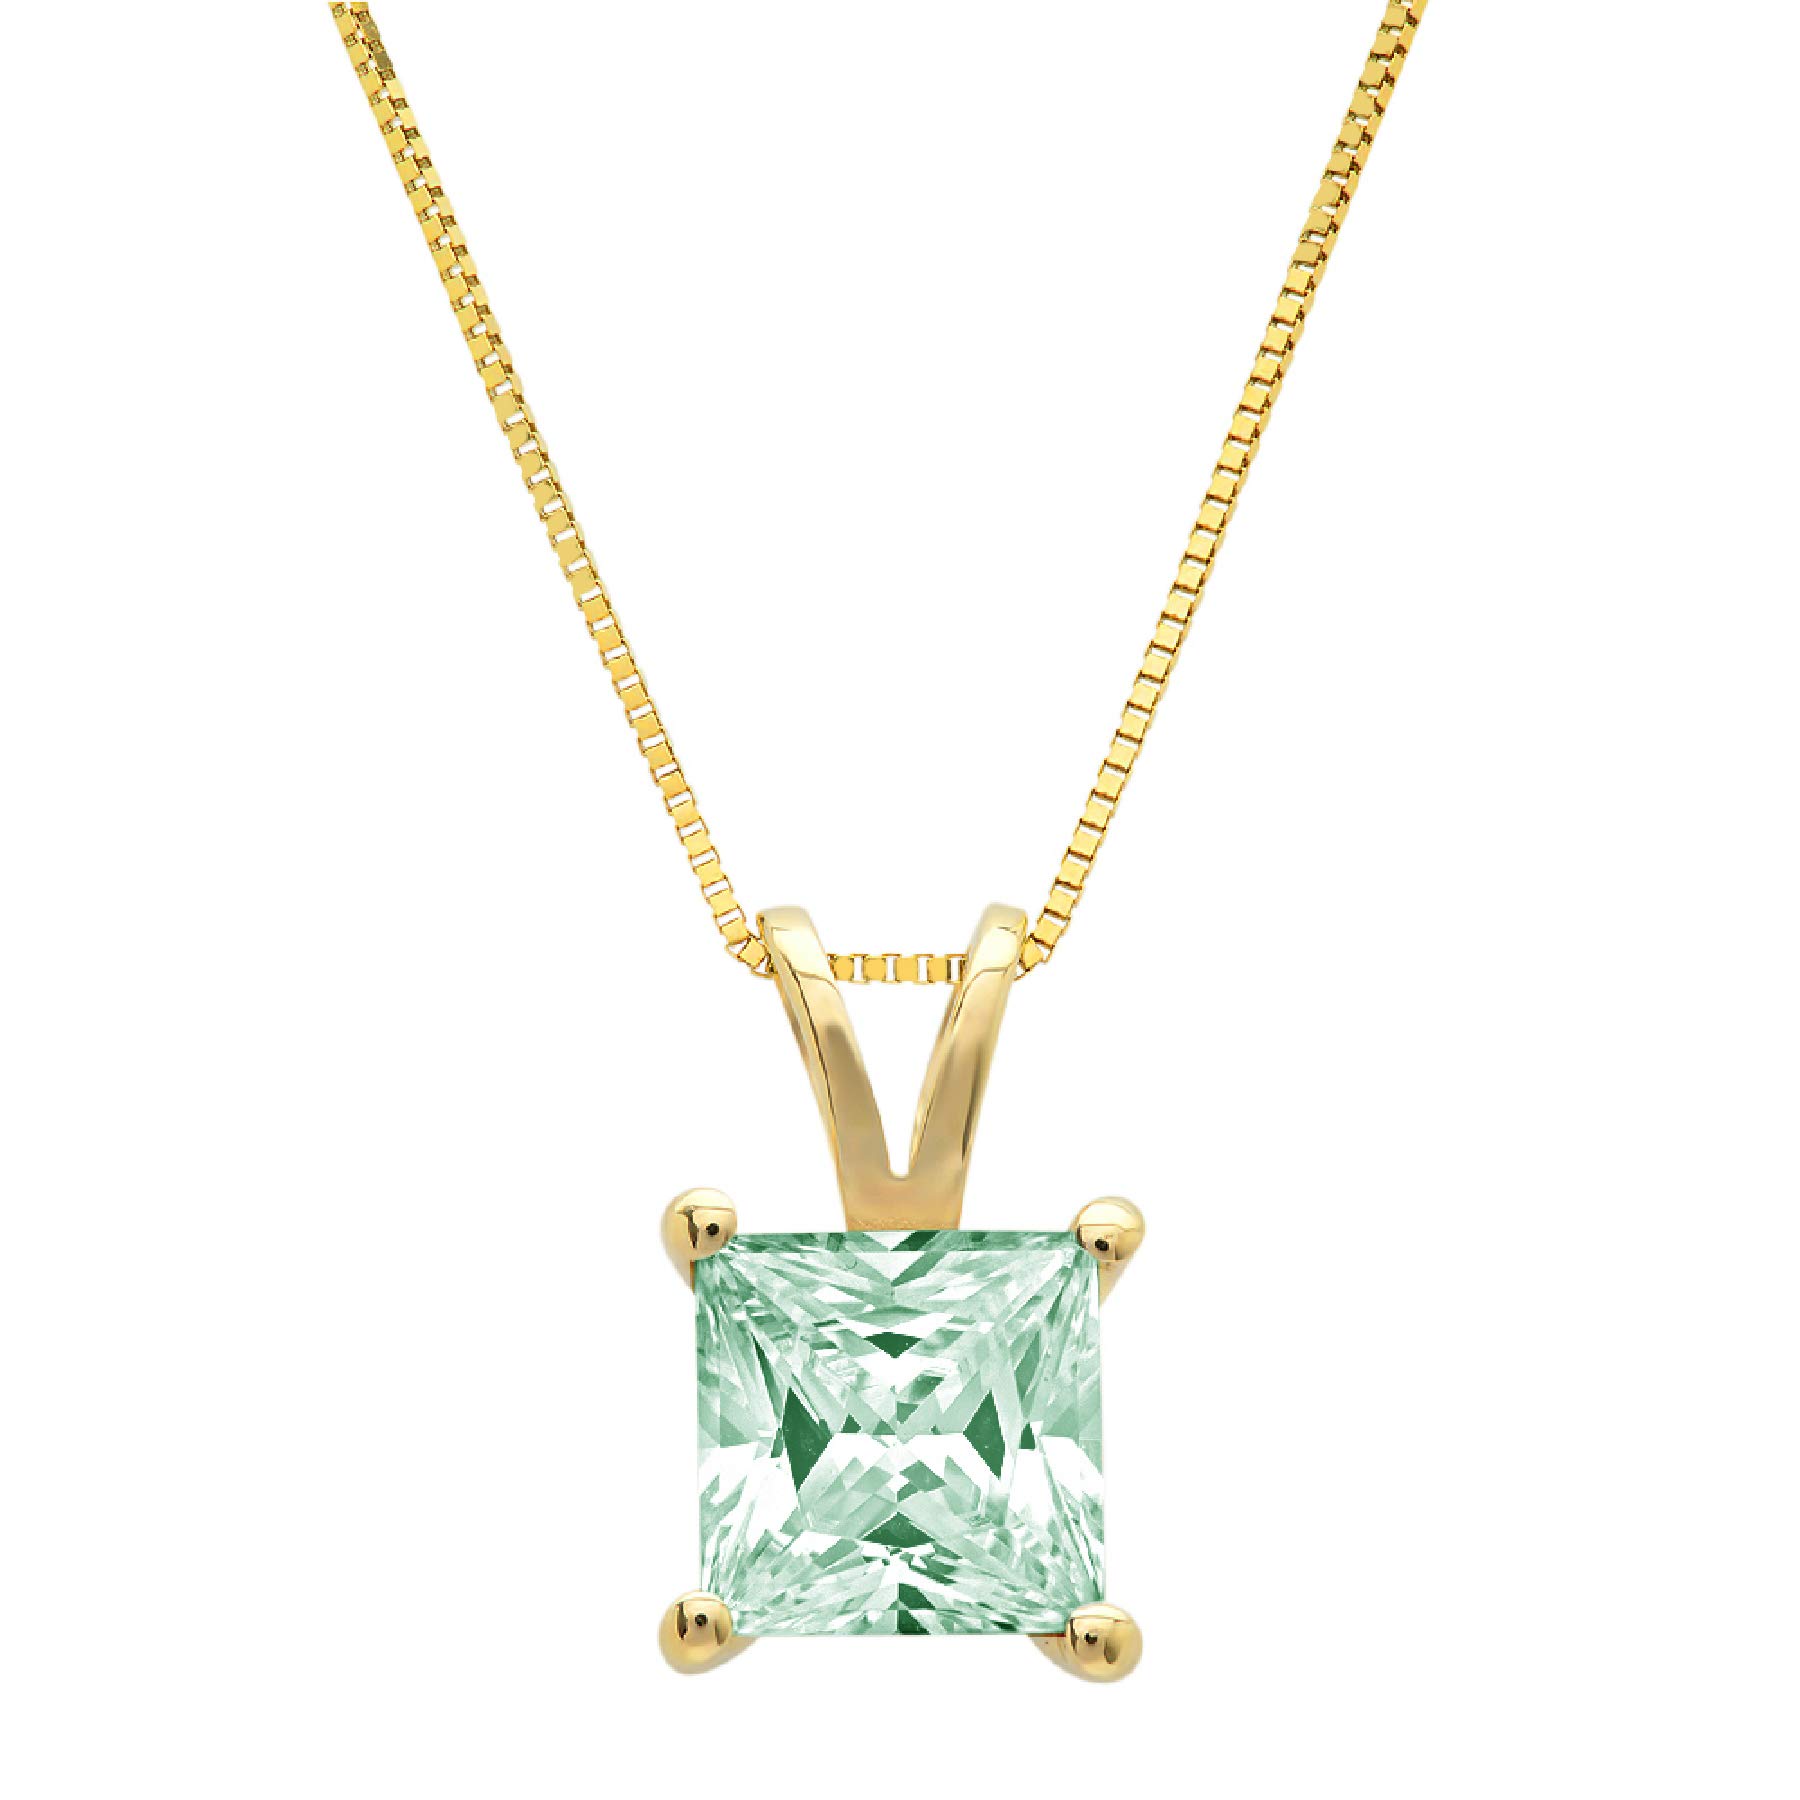 1.0 ct Brilliant Princess Cut Stunning Genuine Turquoise Green Nano Ideal VVS1 D Solitaire Pendant Necklace With 16